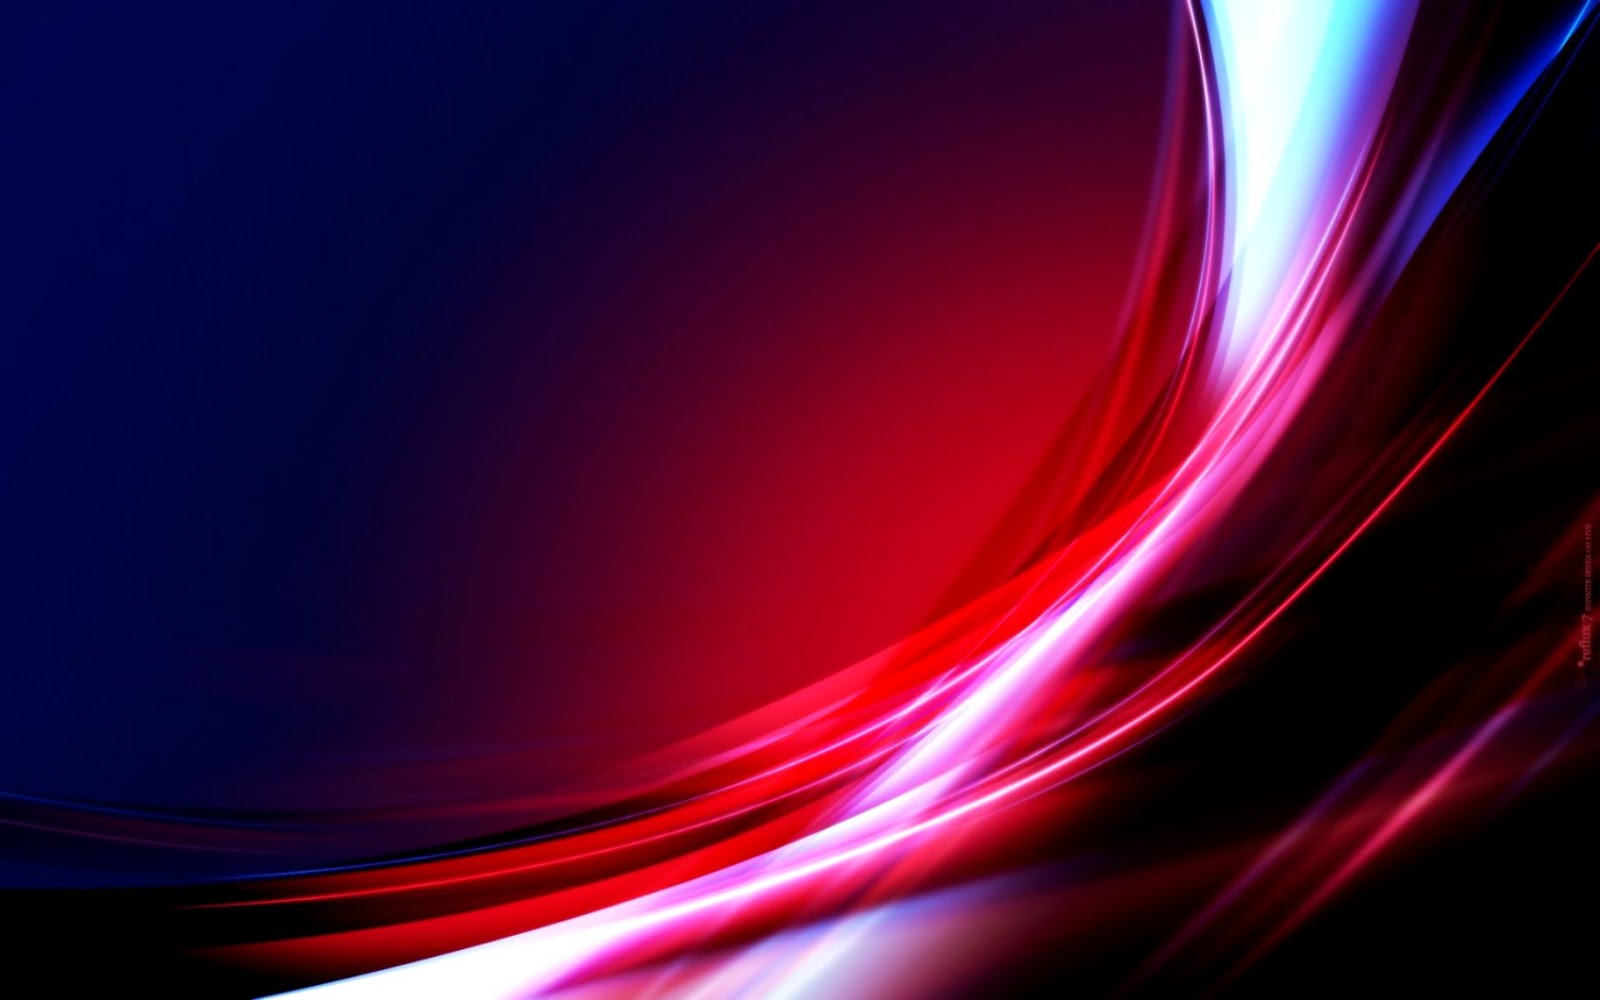 Background Hd Wallpaper - Abstract Color Waves Abstract Jpg - HD Wallpaper 